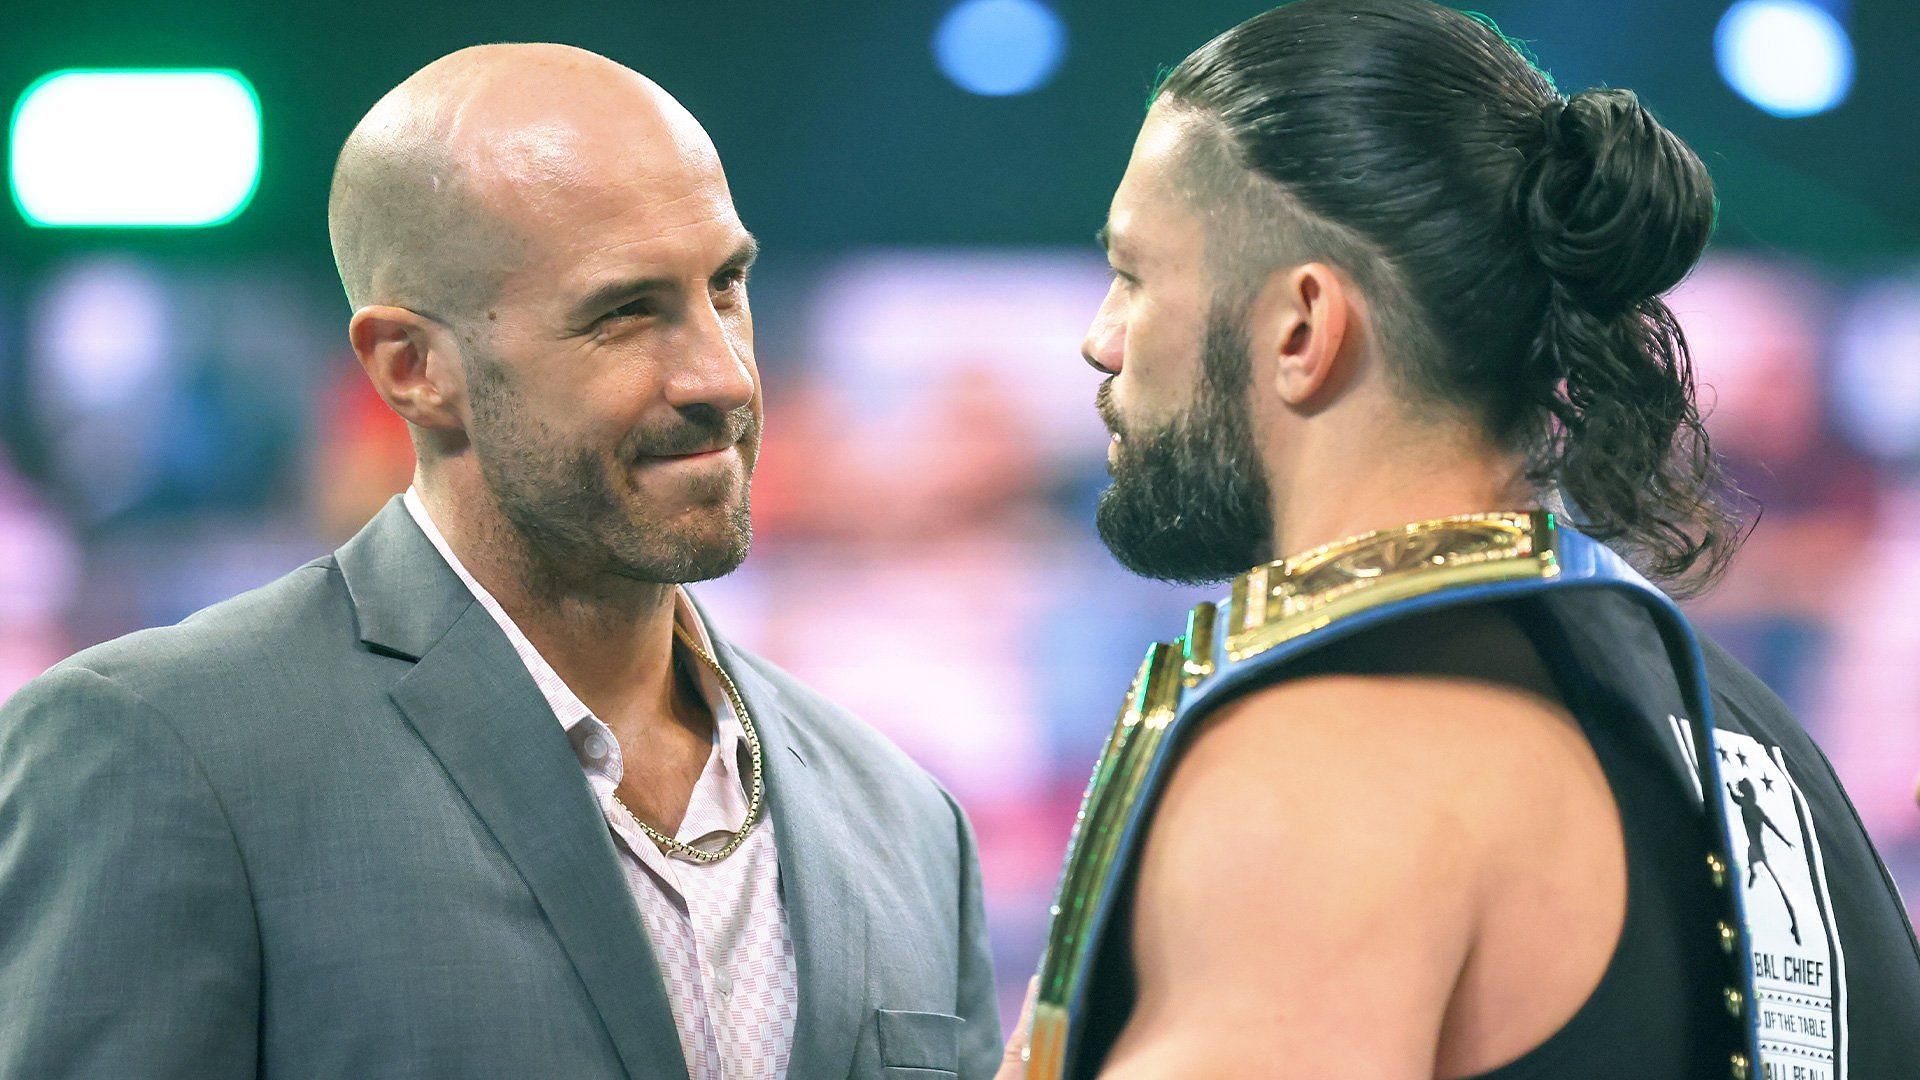 Cesaro and Roman Reigns